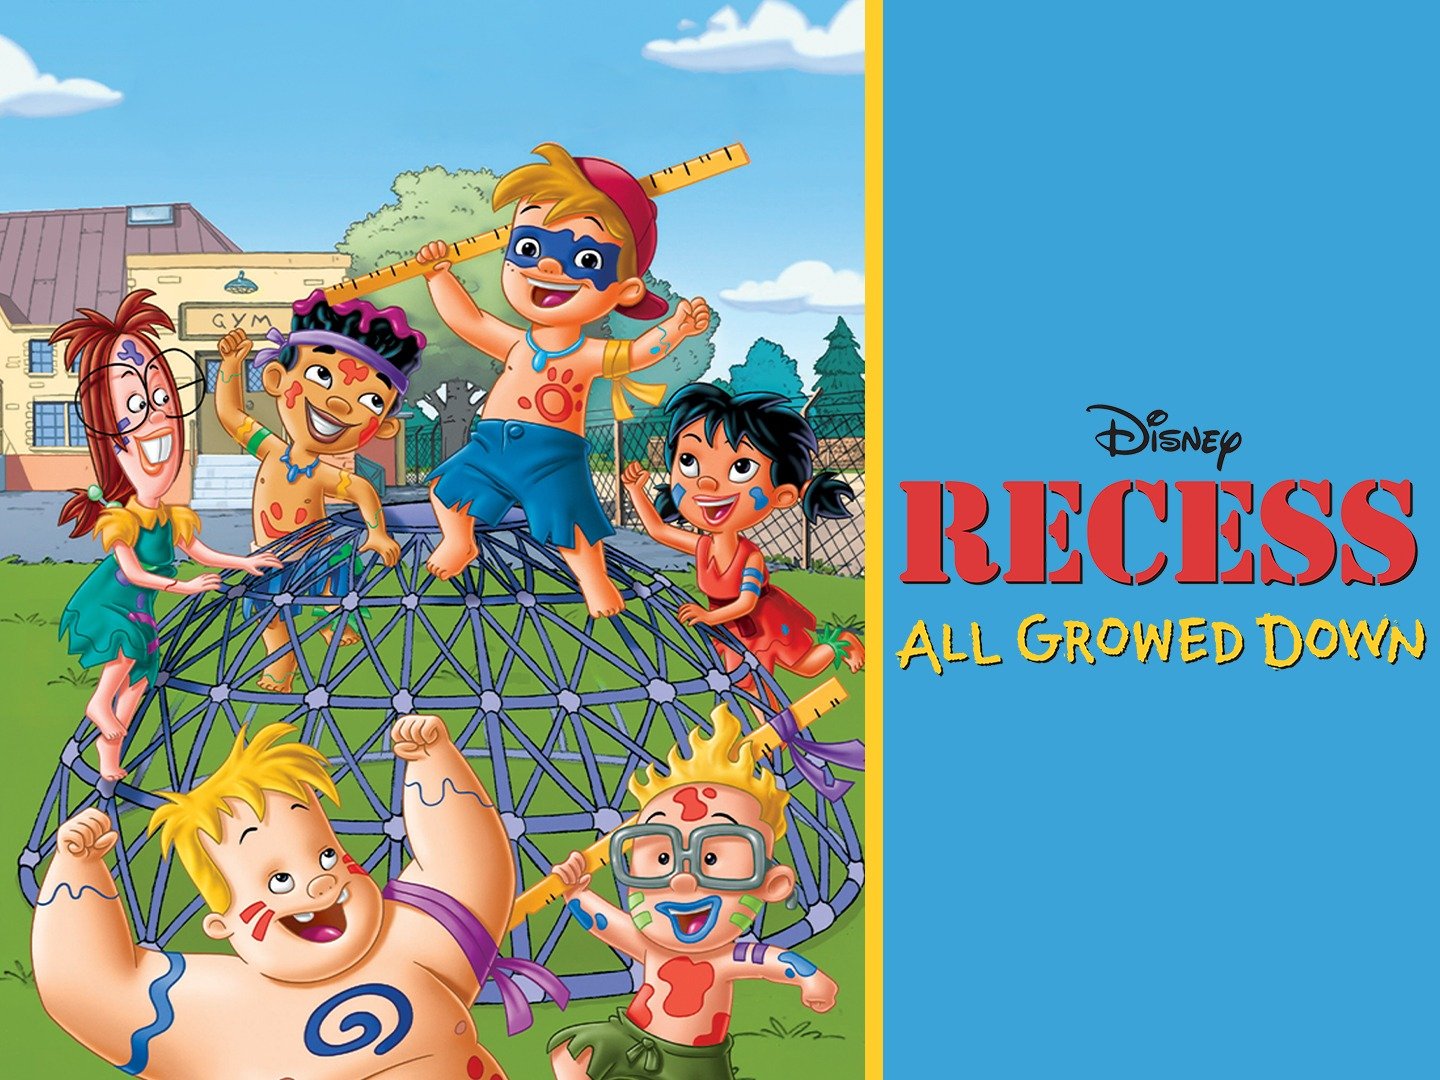 Recess: All Growed Down Audience Reviews | Flixster